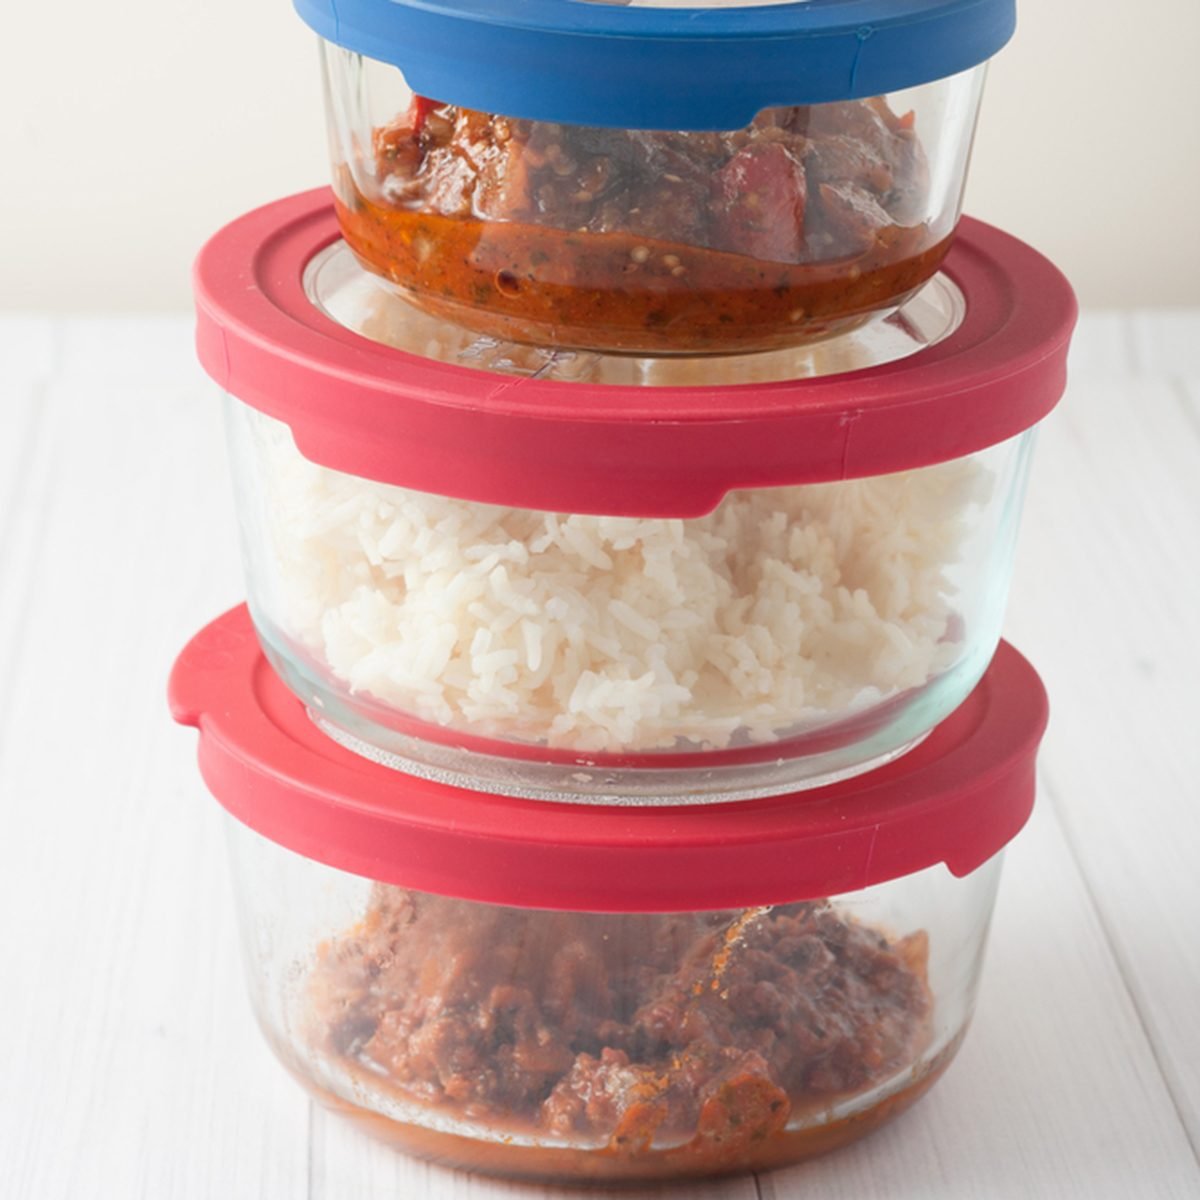 This Pizza Storage Container Stacks Slices and Keeps Them Fresh